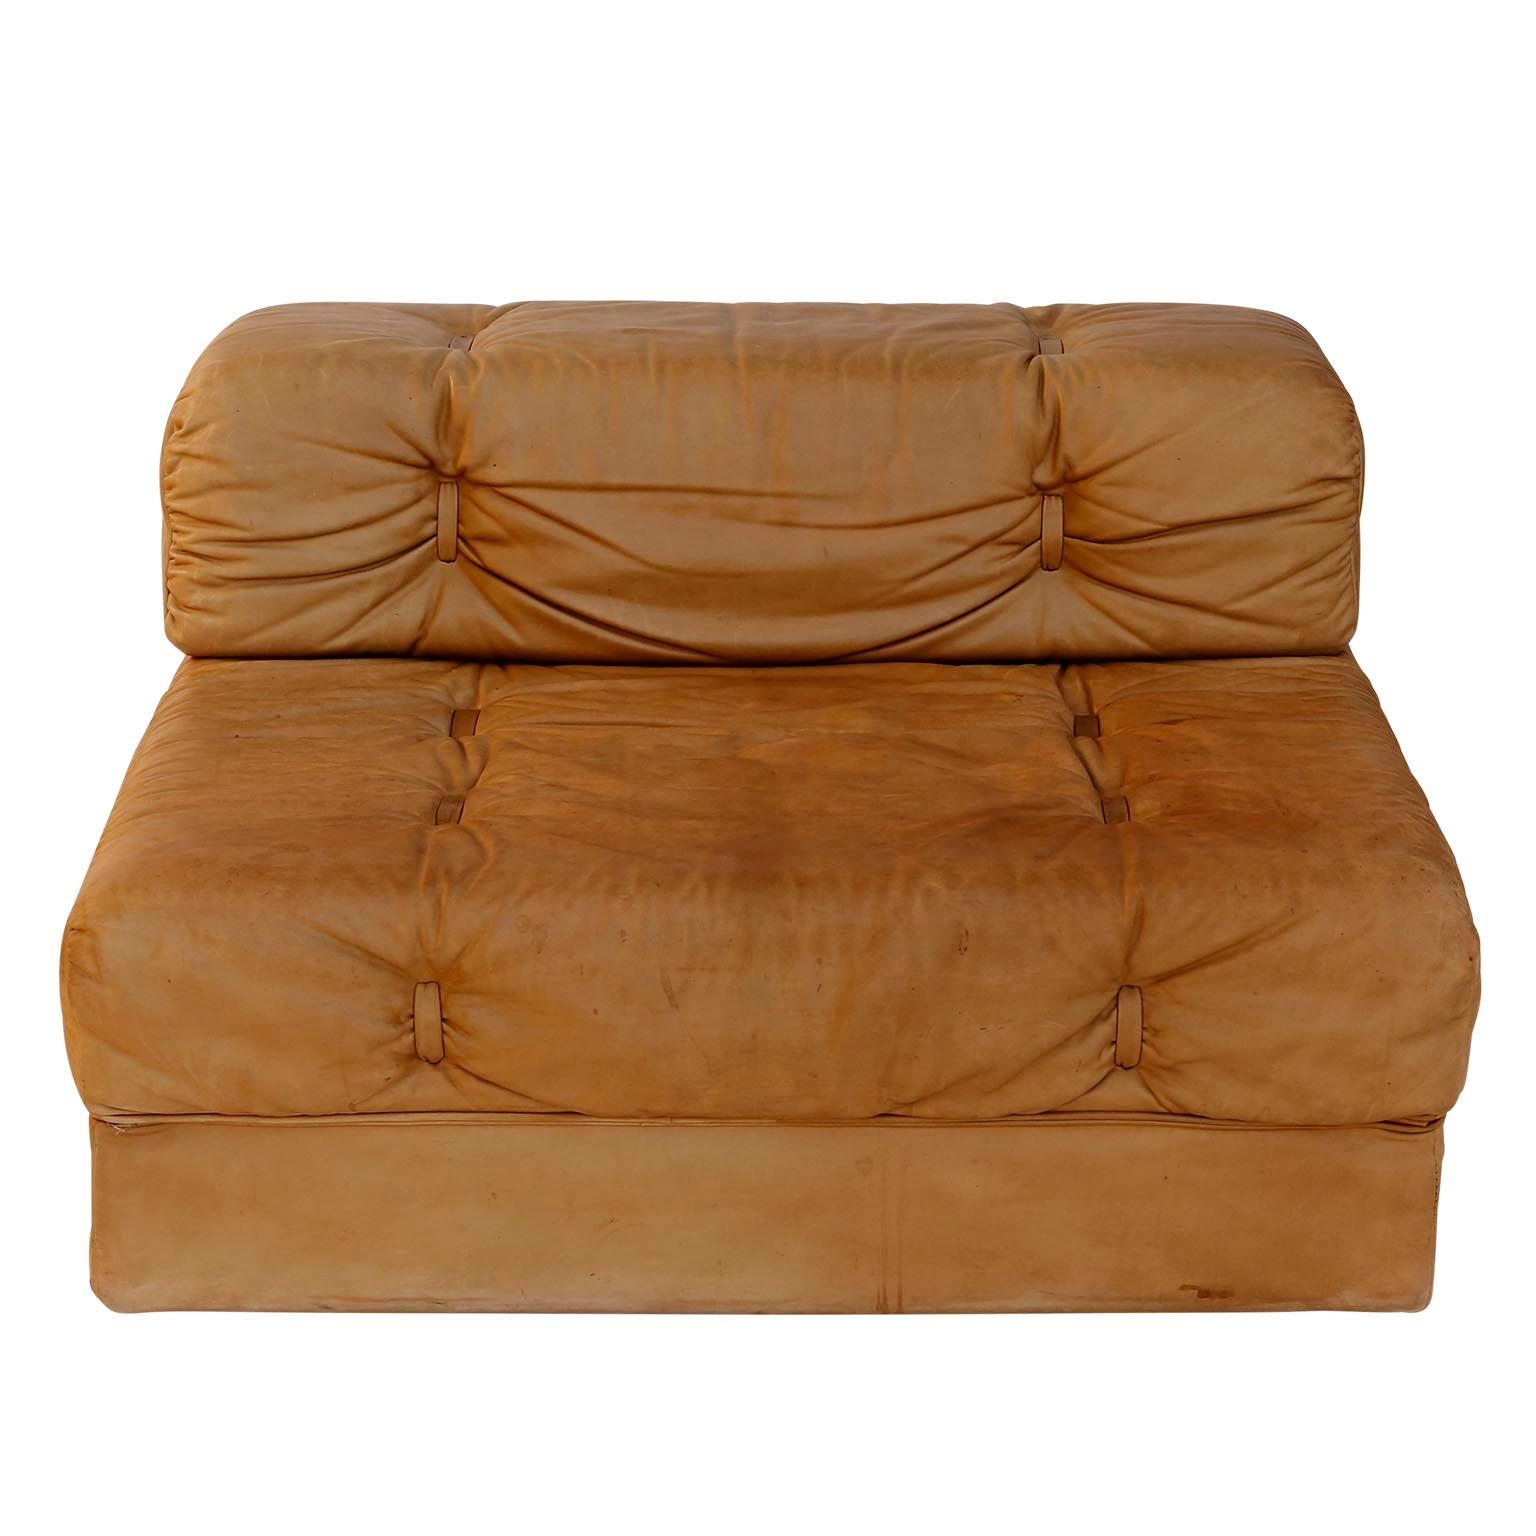 Pair of Chairs Convertable Bed Daybed Sofa 'Atrium', Wittmann, Cognac Leather 2